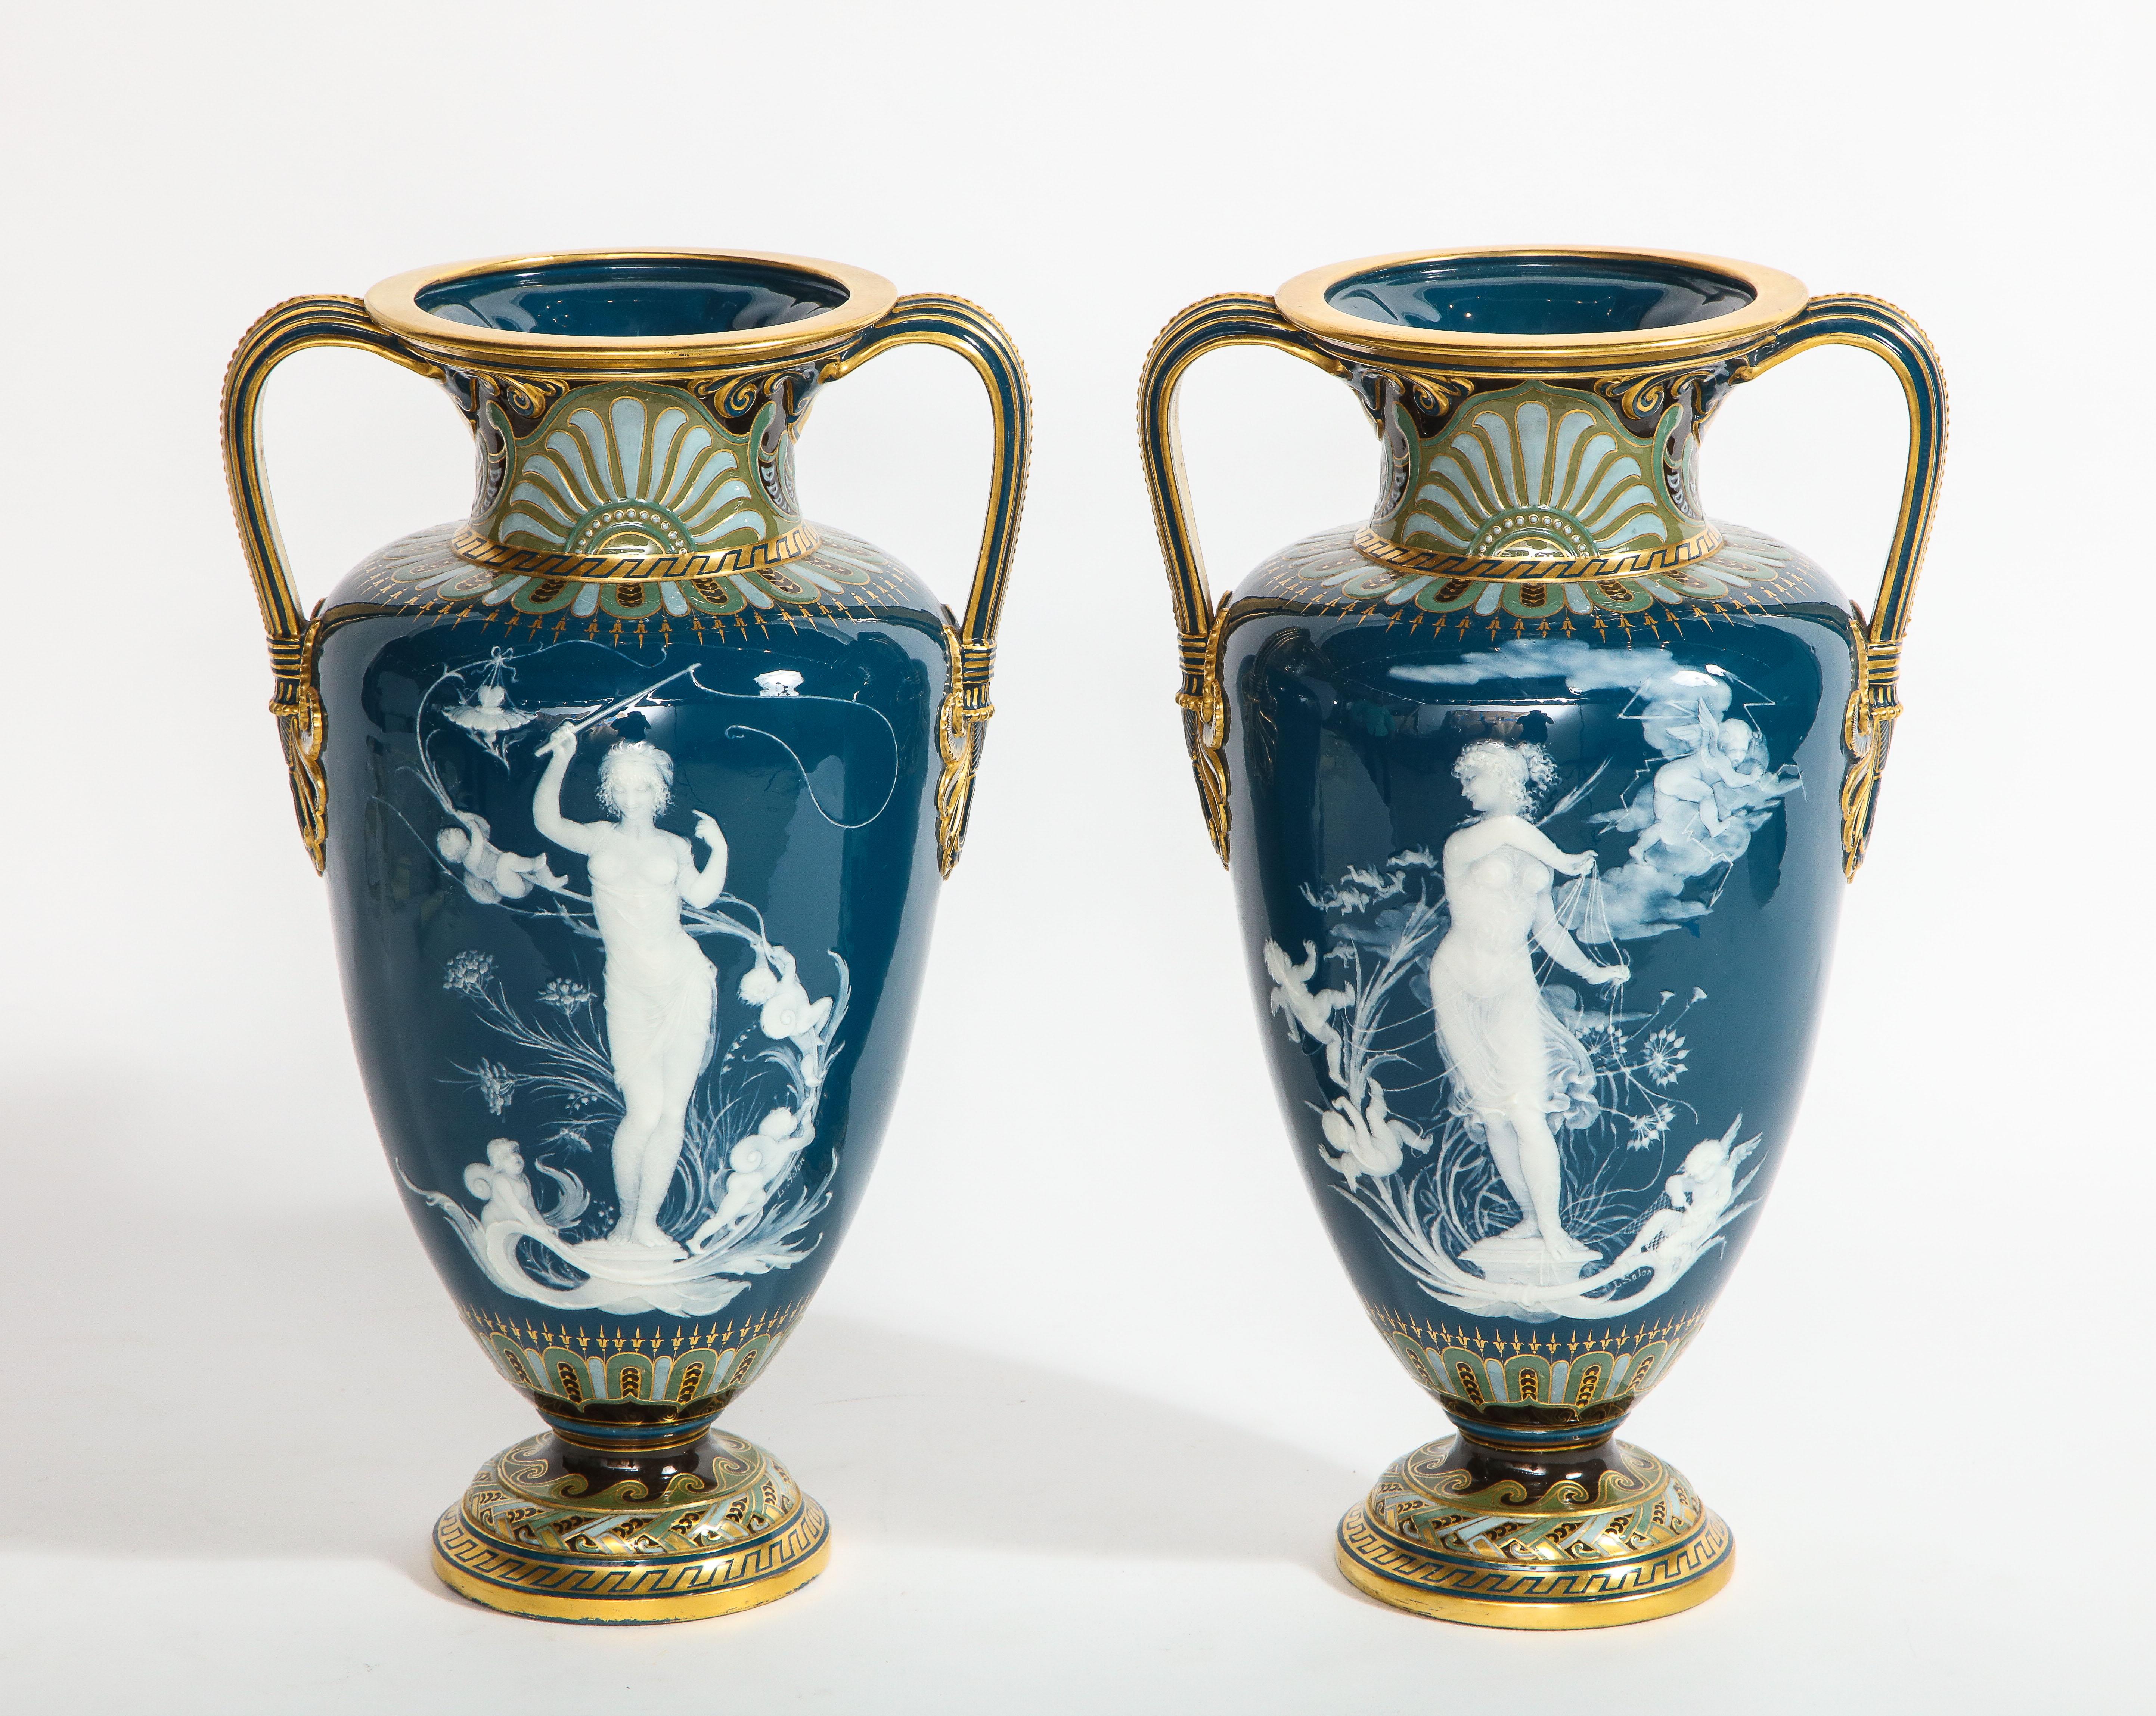 A monumental, rare, and highly important pair of Mintons Pâte-Sur-Pâte Peacock-Blue-Ground Vases, Known as 'Too Fast' And 'Too Slow' Produced in 1893, signed by Louis Solon. Shape number 3044, decorated by Marc Louis Solon, signed L. Solon in white